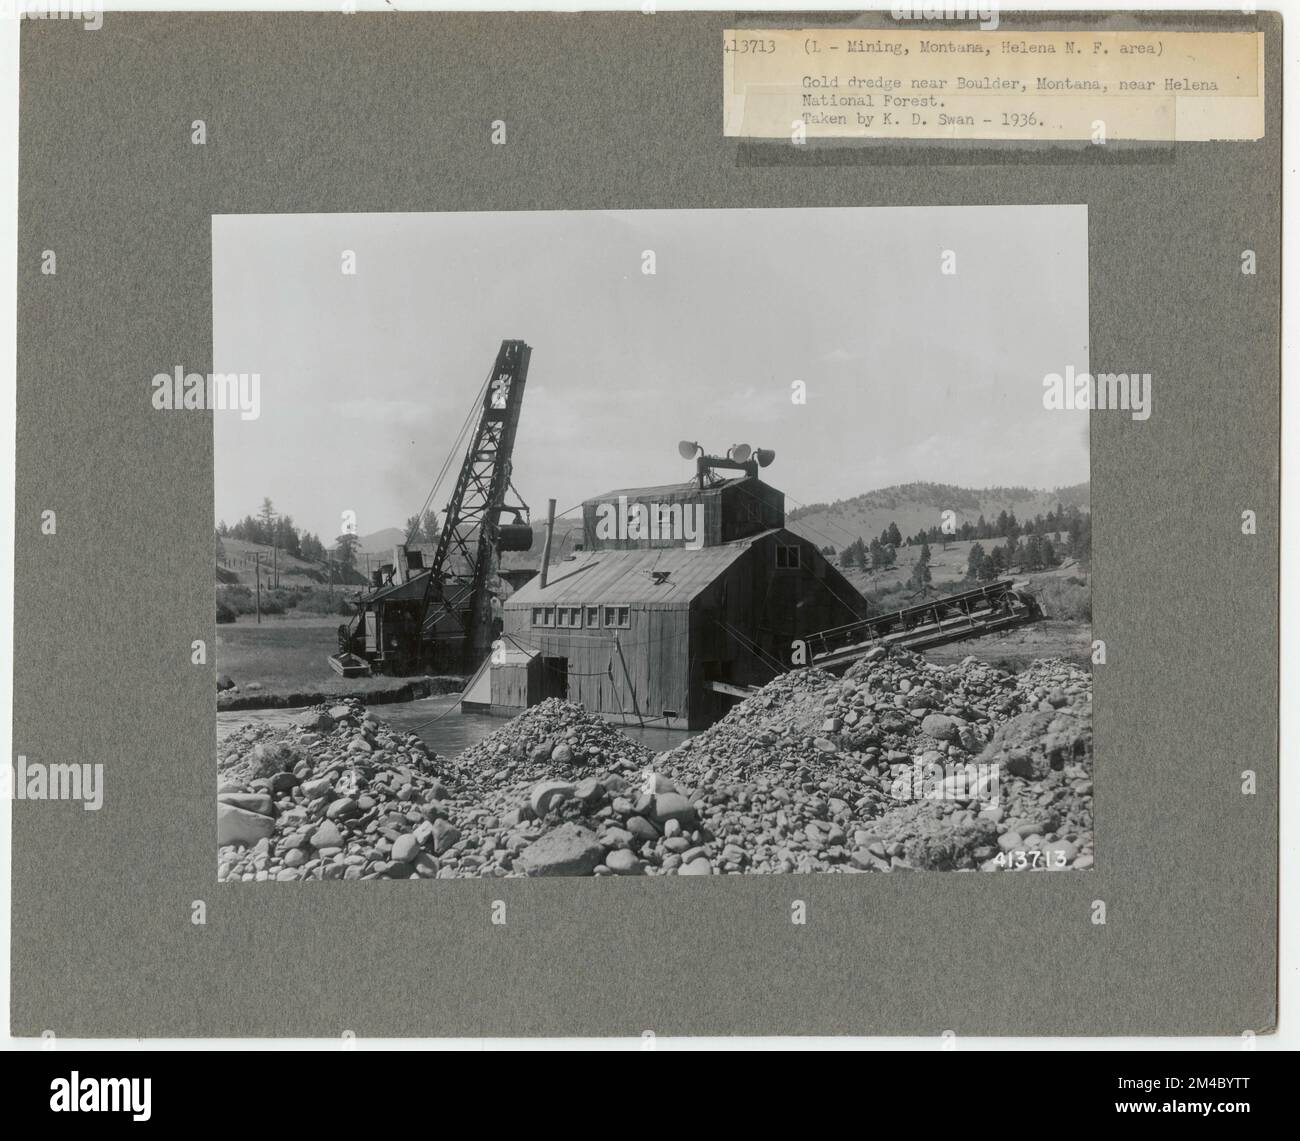 Mining - Montana. Photographs Relating to National Forests, Resource Management Practices, Personnel, and Cultural and Economic History Stock Photo